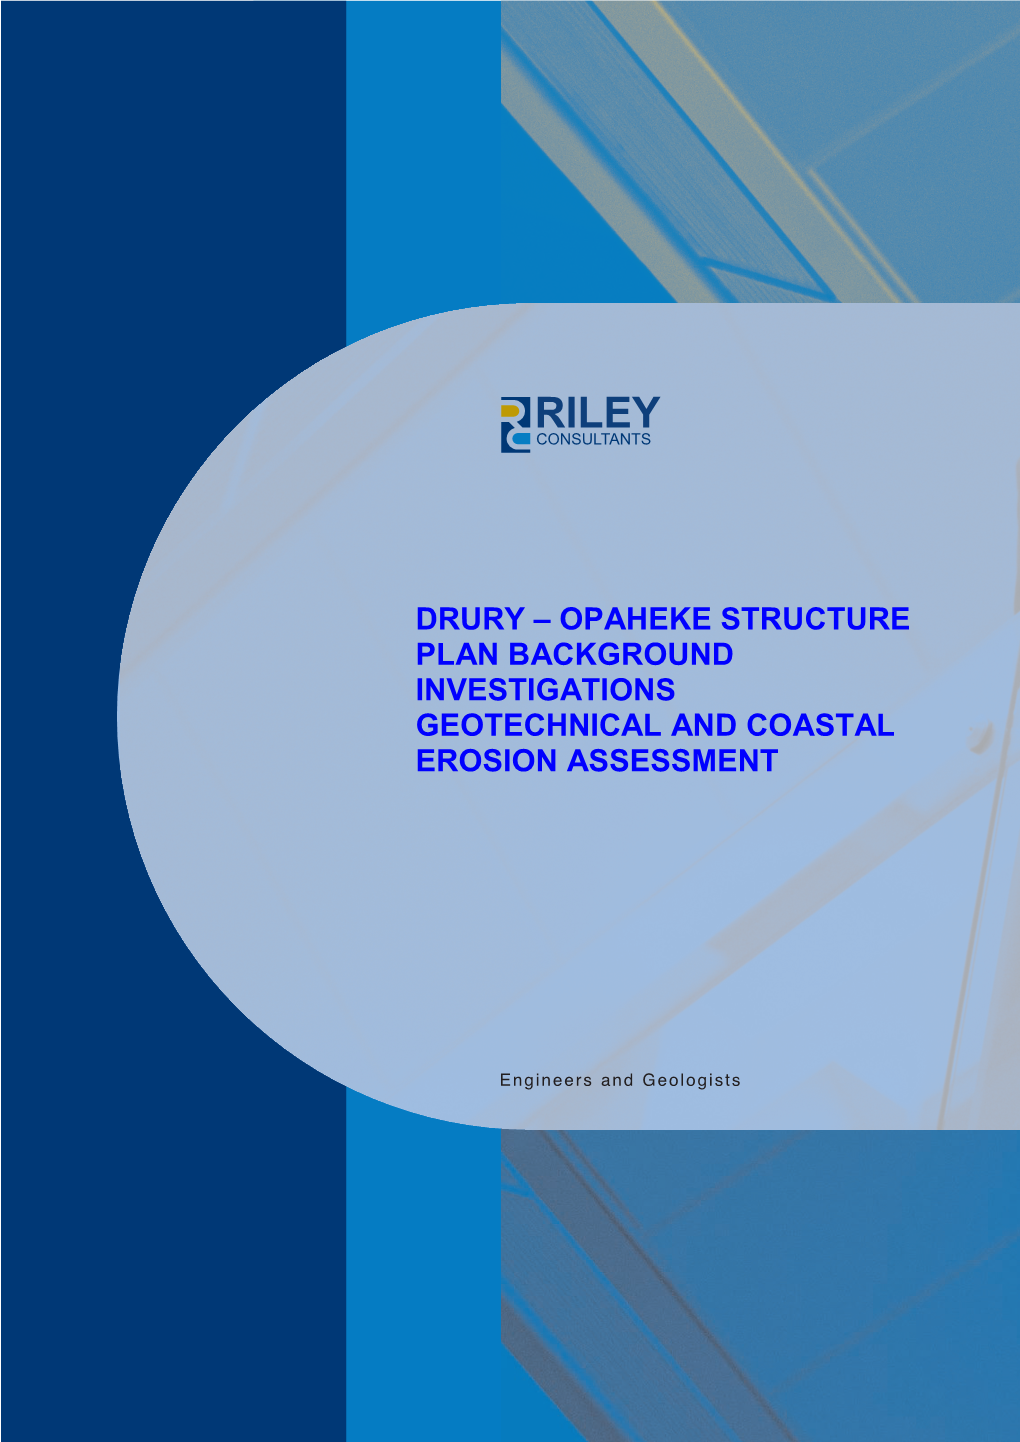 Drury Structure Plan, Geotechnical and Coastal Erosion Assessment RILEY Ref: 170275-C (Issue 2.0) Page 4